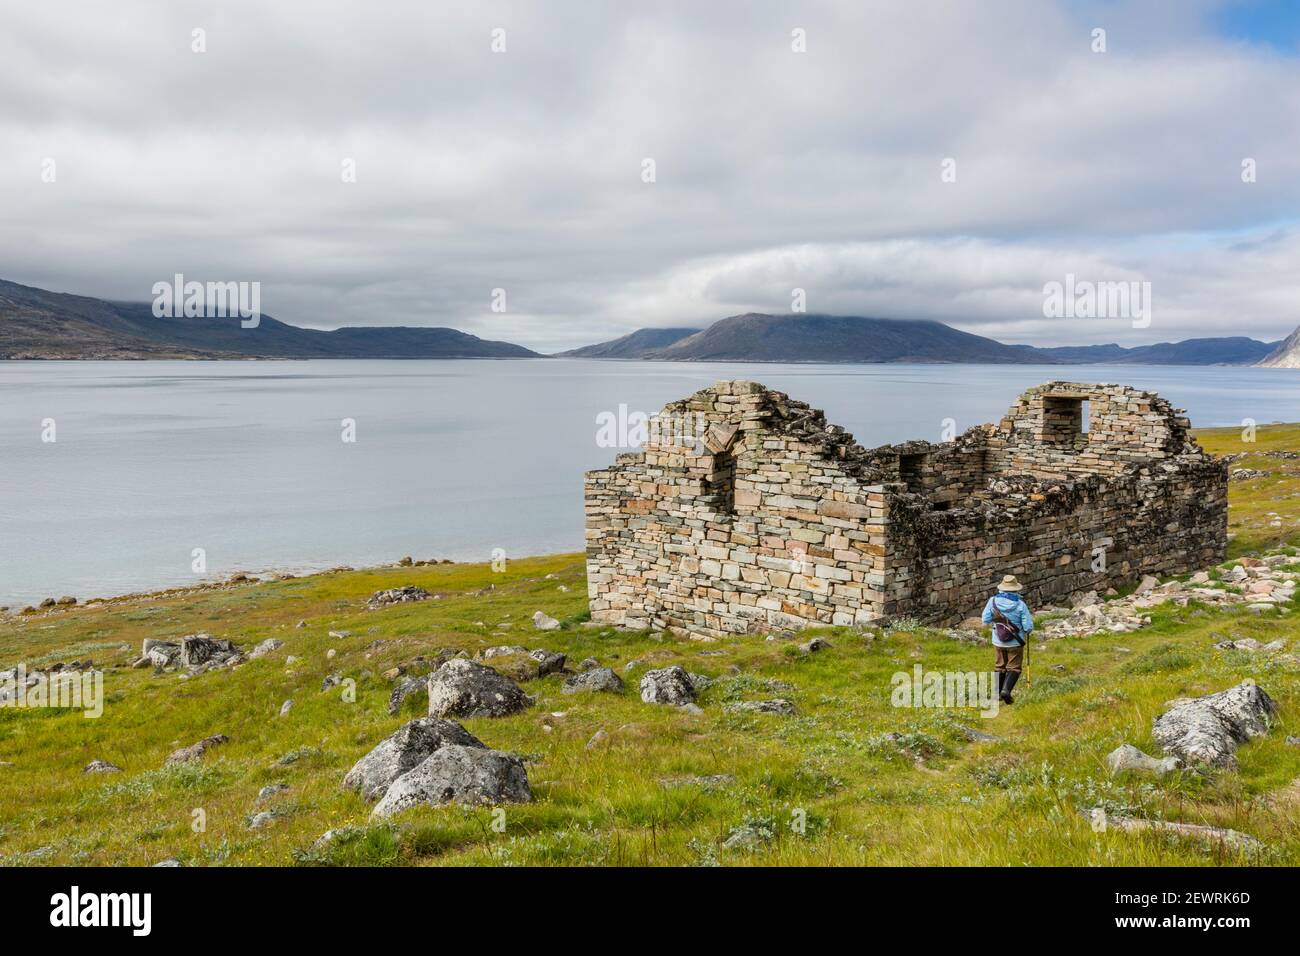 Church at Greenland's largest, best-preserved Norse farmstead ruins at Hvalsey, Qaqortukulooq, Greenland, Polar Regions Stock Photo